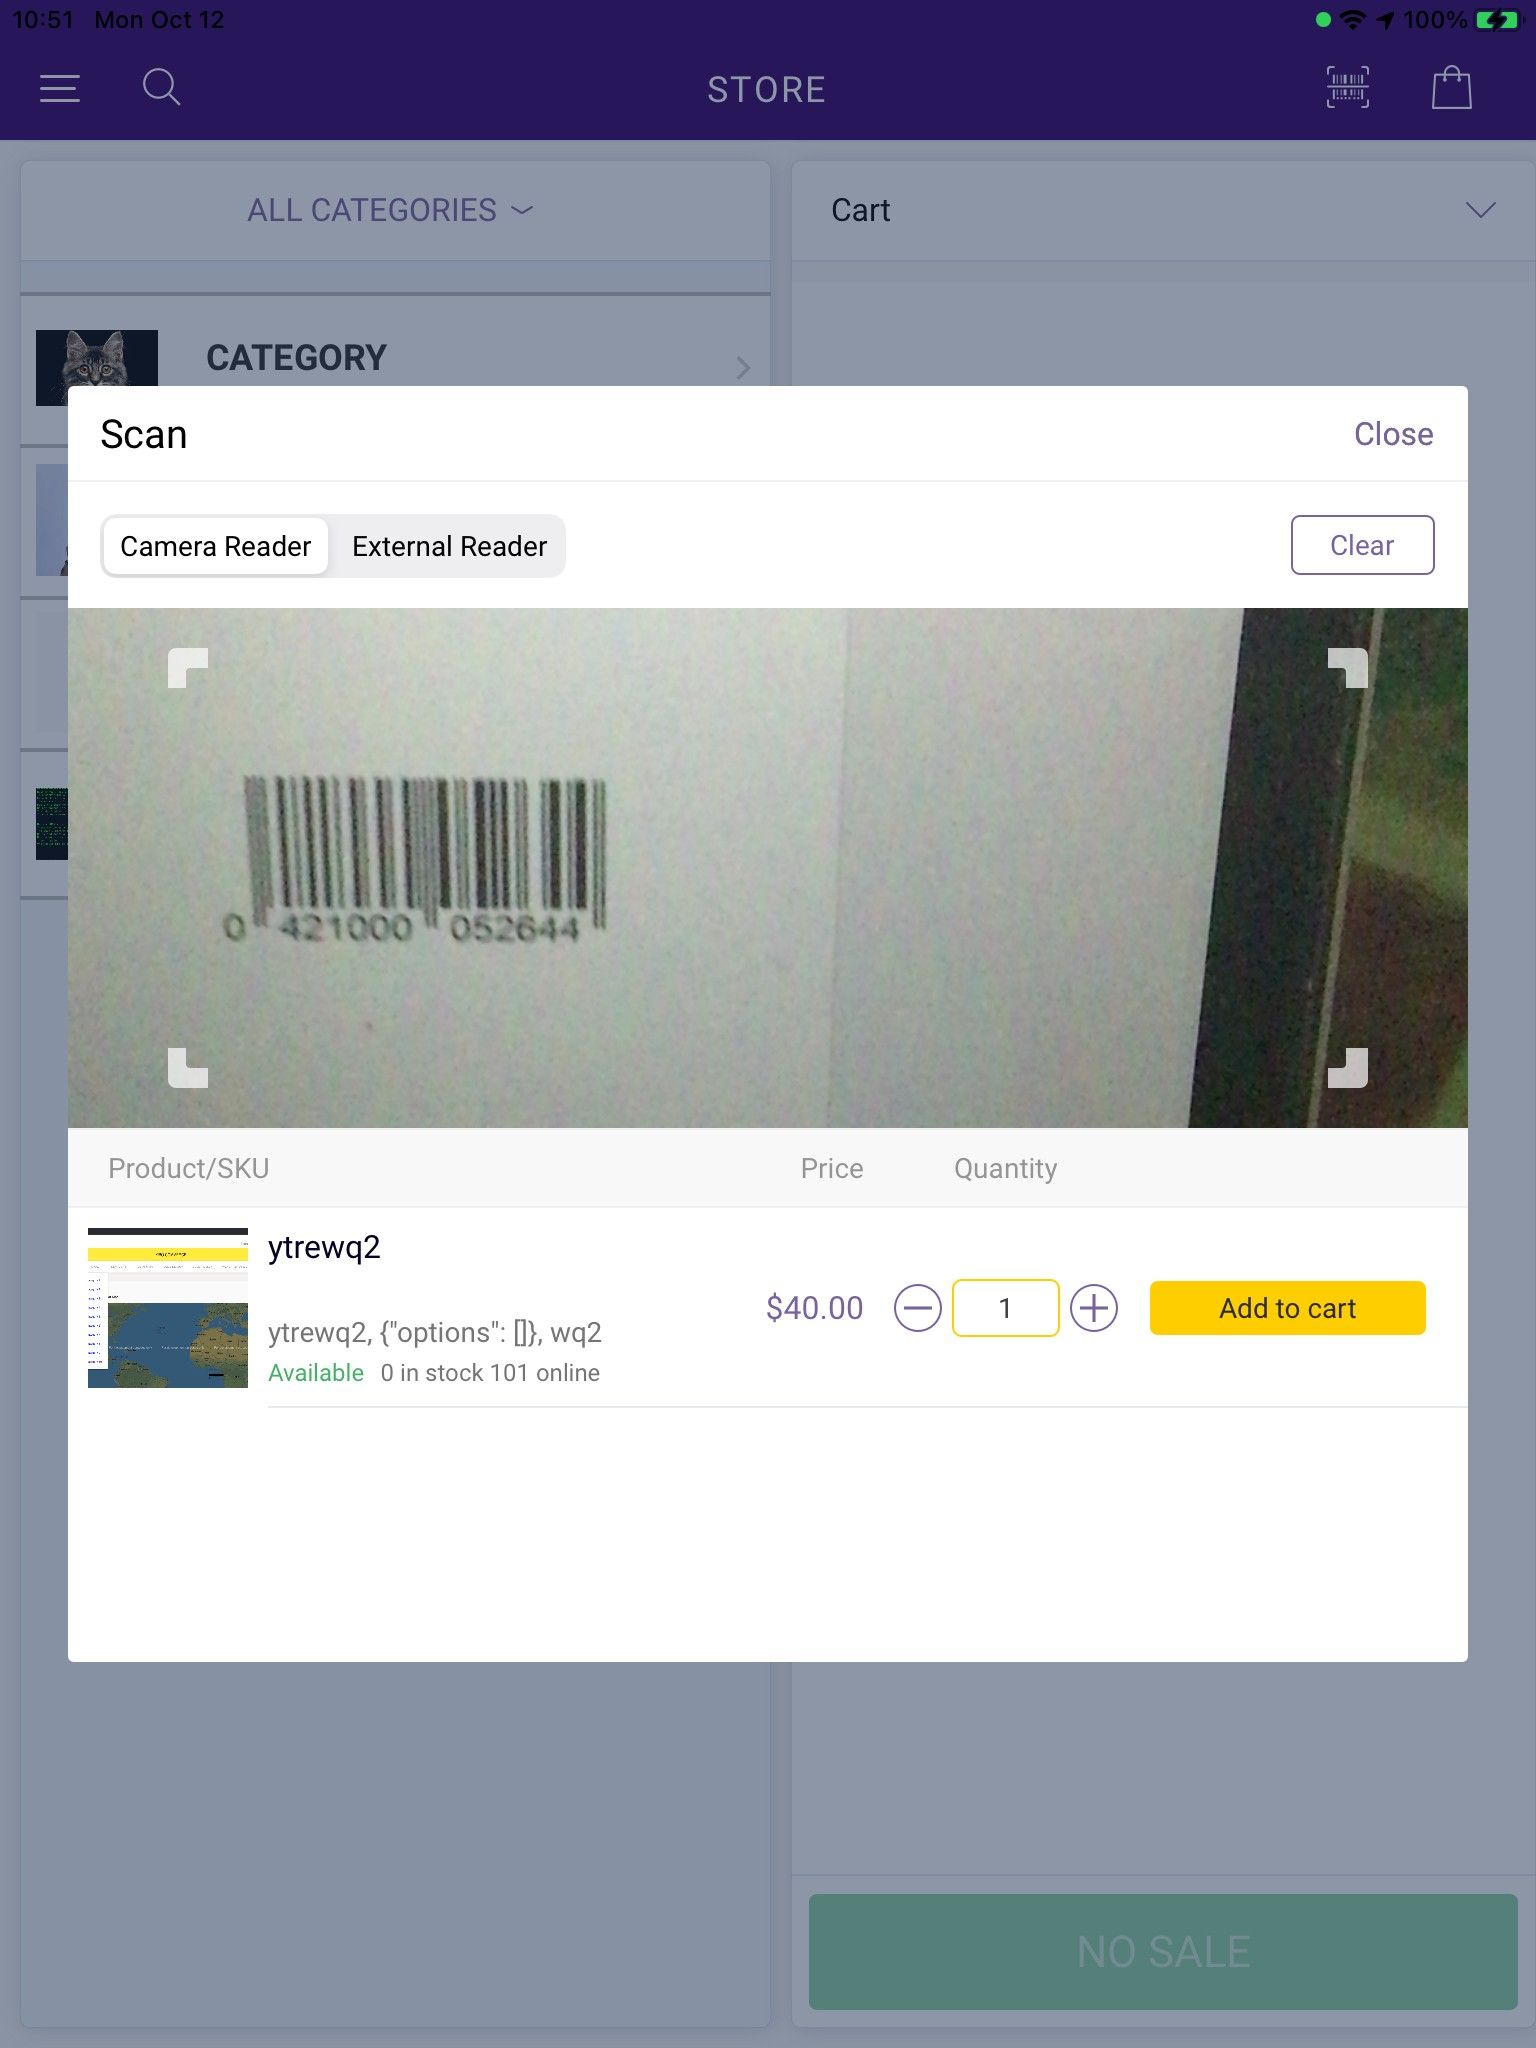 Example of scanning a product with the camera, with the product details populated